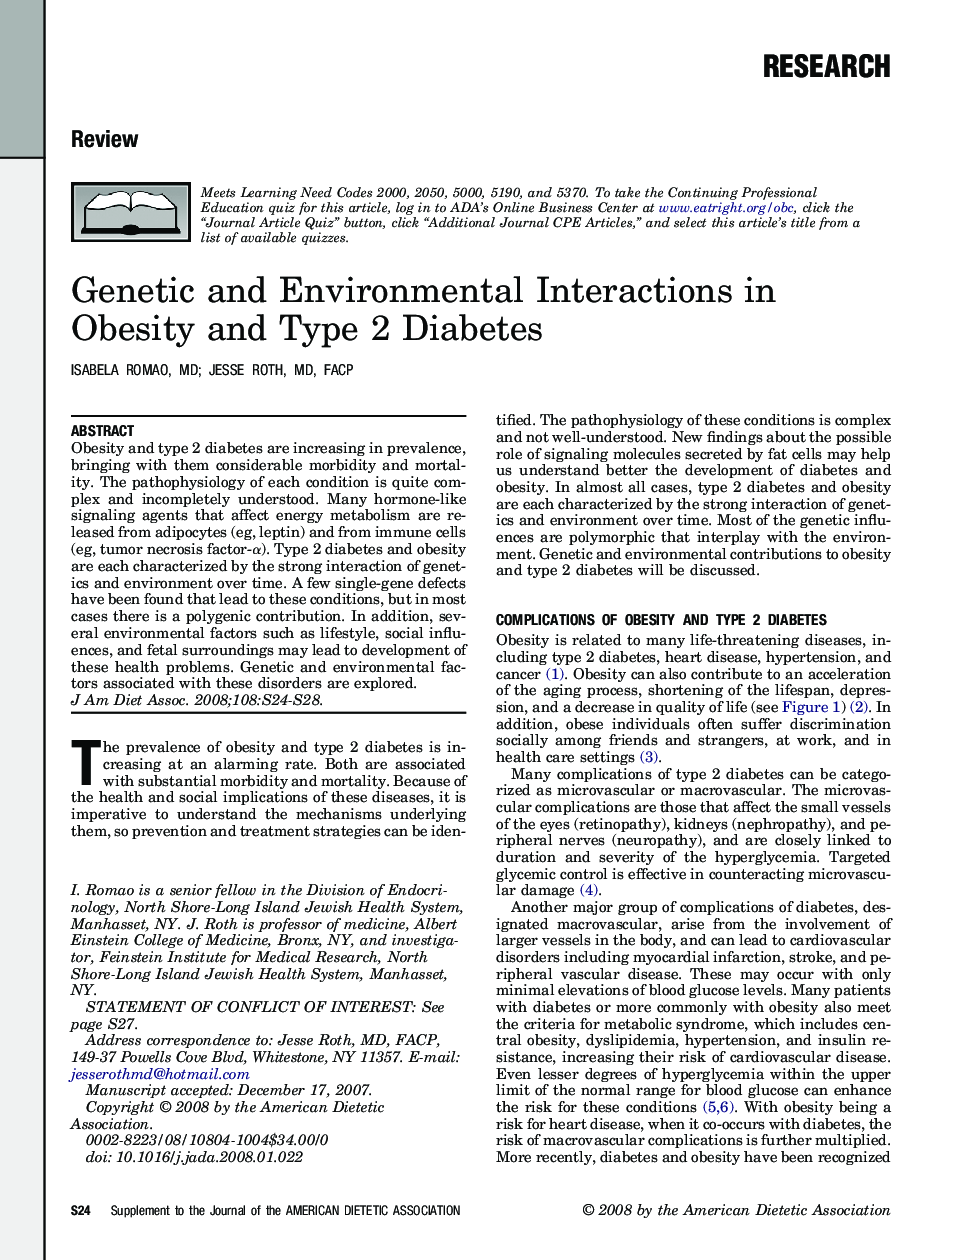 Genetic and Environmental Interactions in Obesity and Type 2 Diabetes 